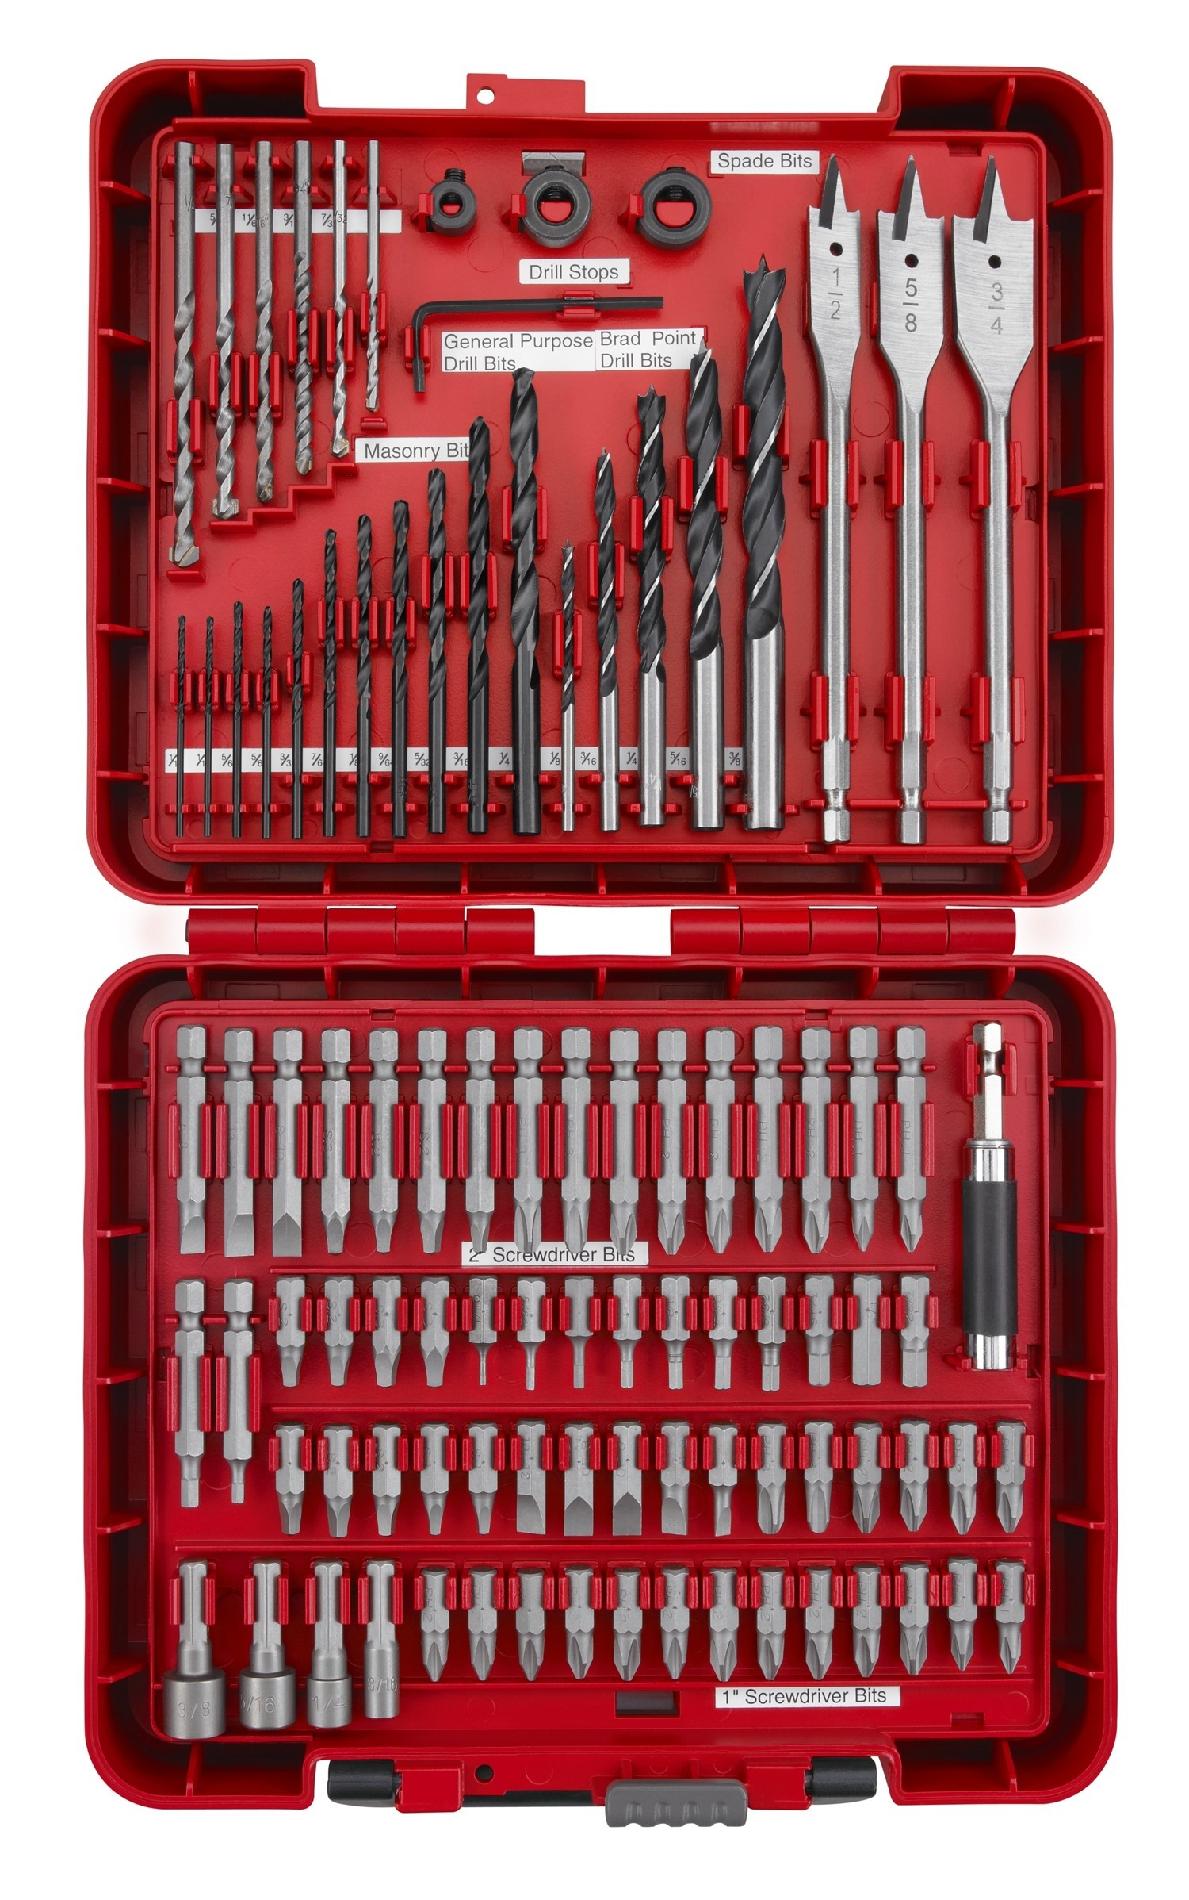 Craftsman 100-PC Accessory Kit Only $12.99 | Down From $29.99!